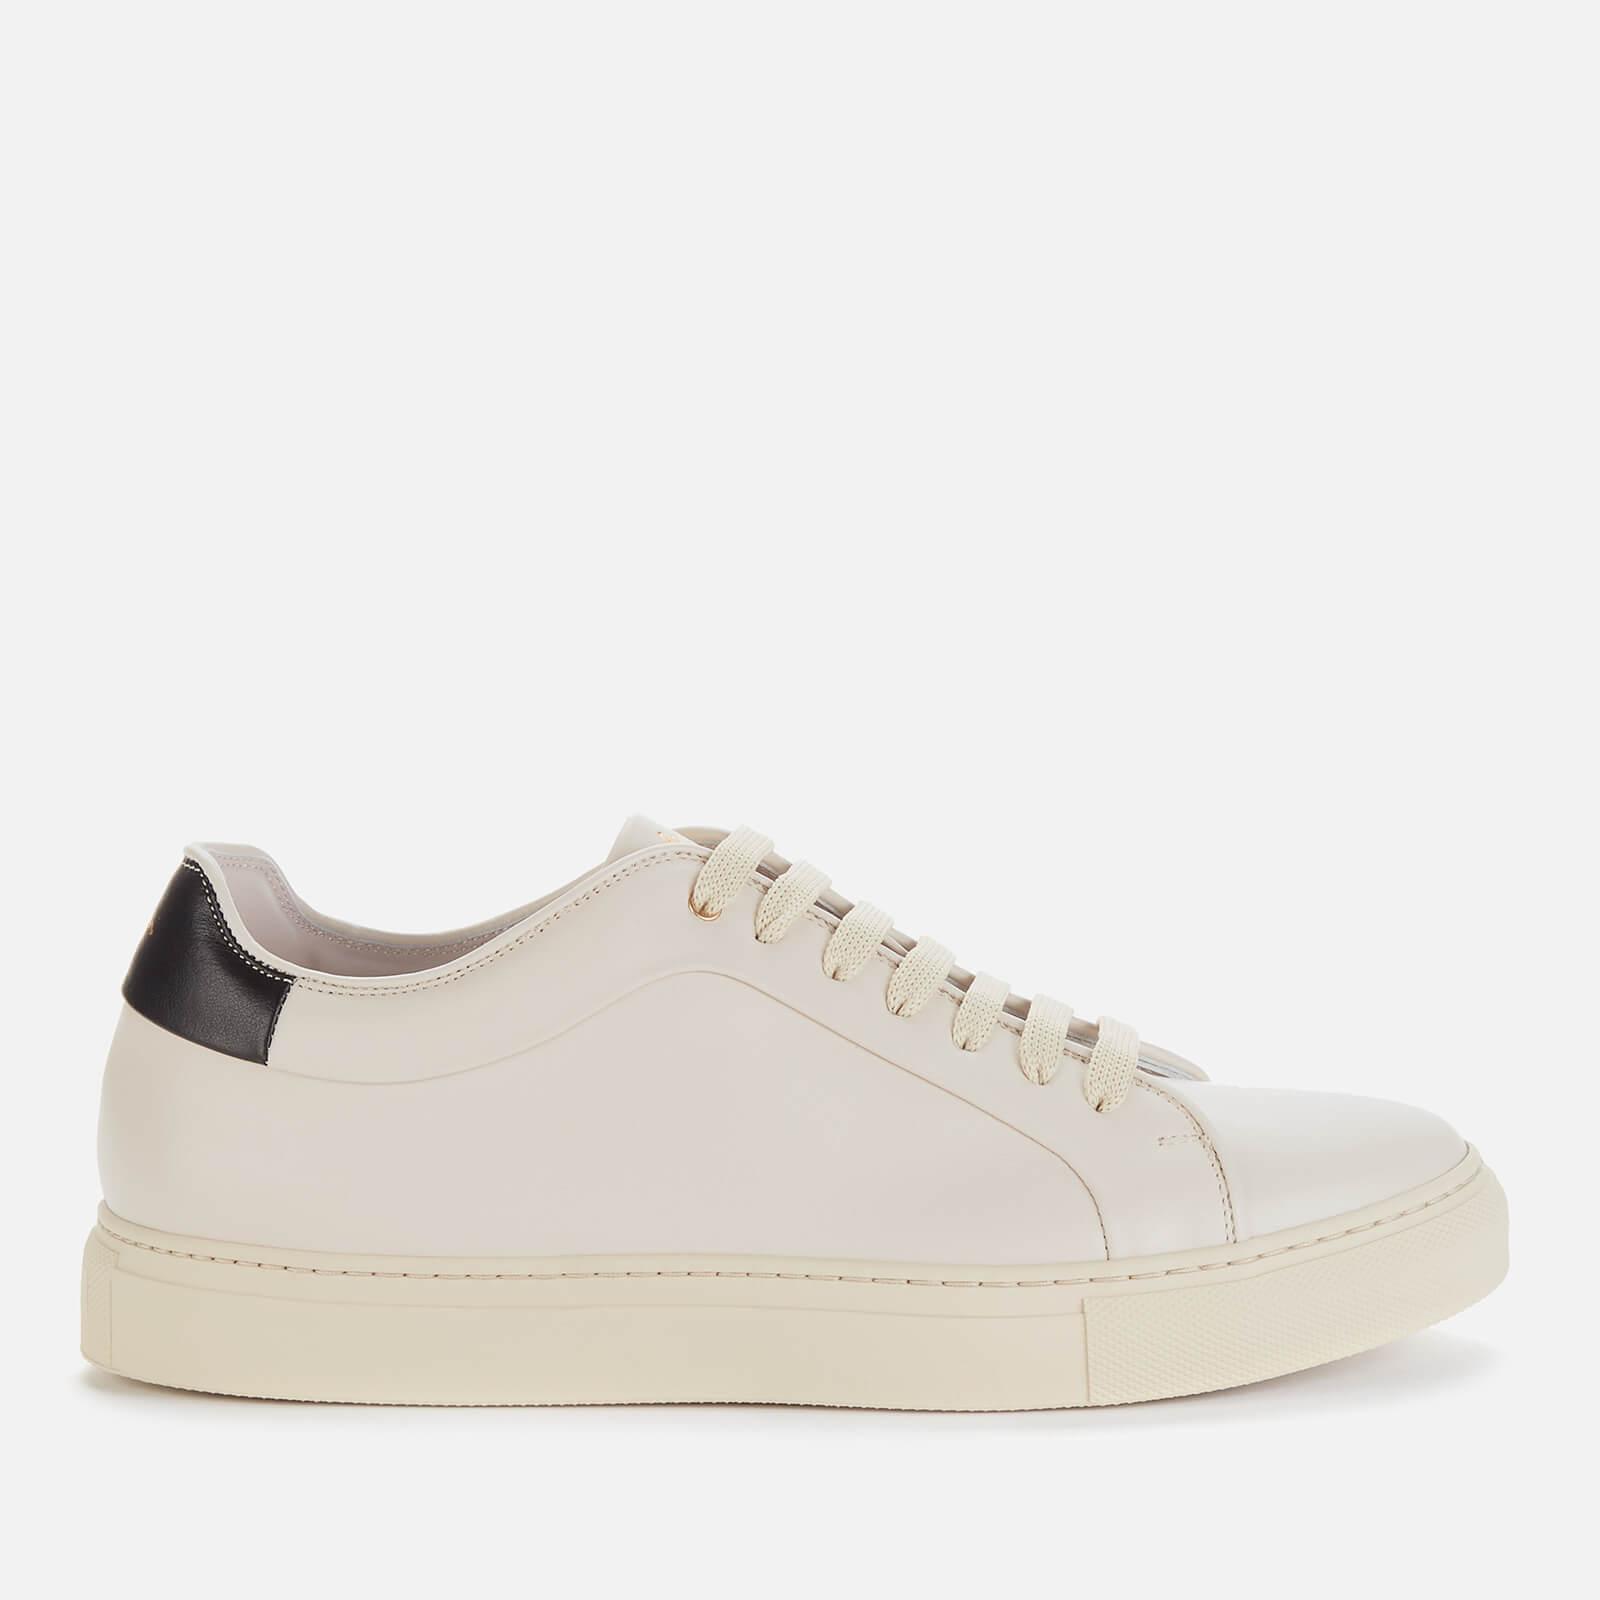 Paul Smith Men's Basso Leather Cupsole Trainers - Ivory - UK 7